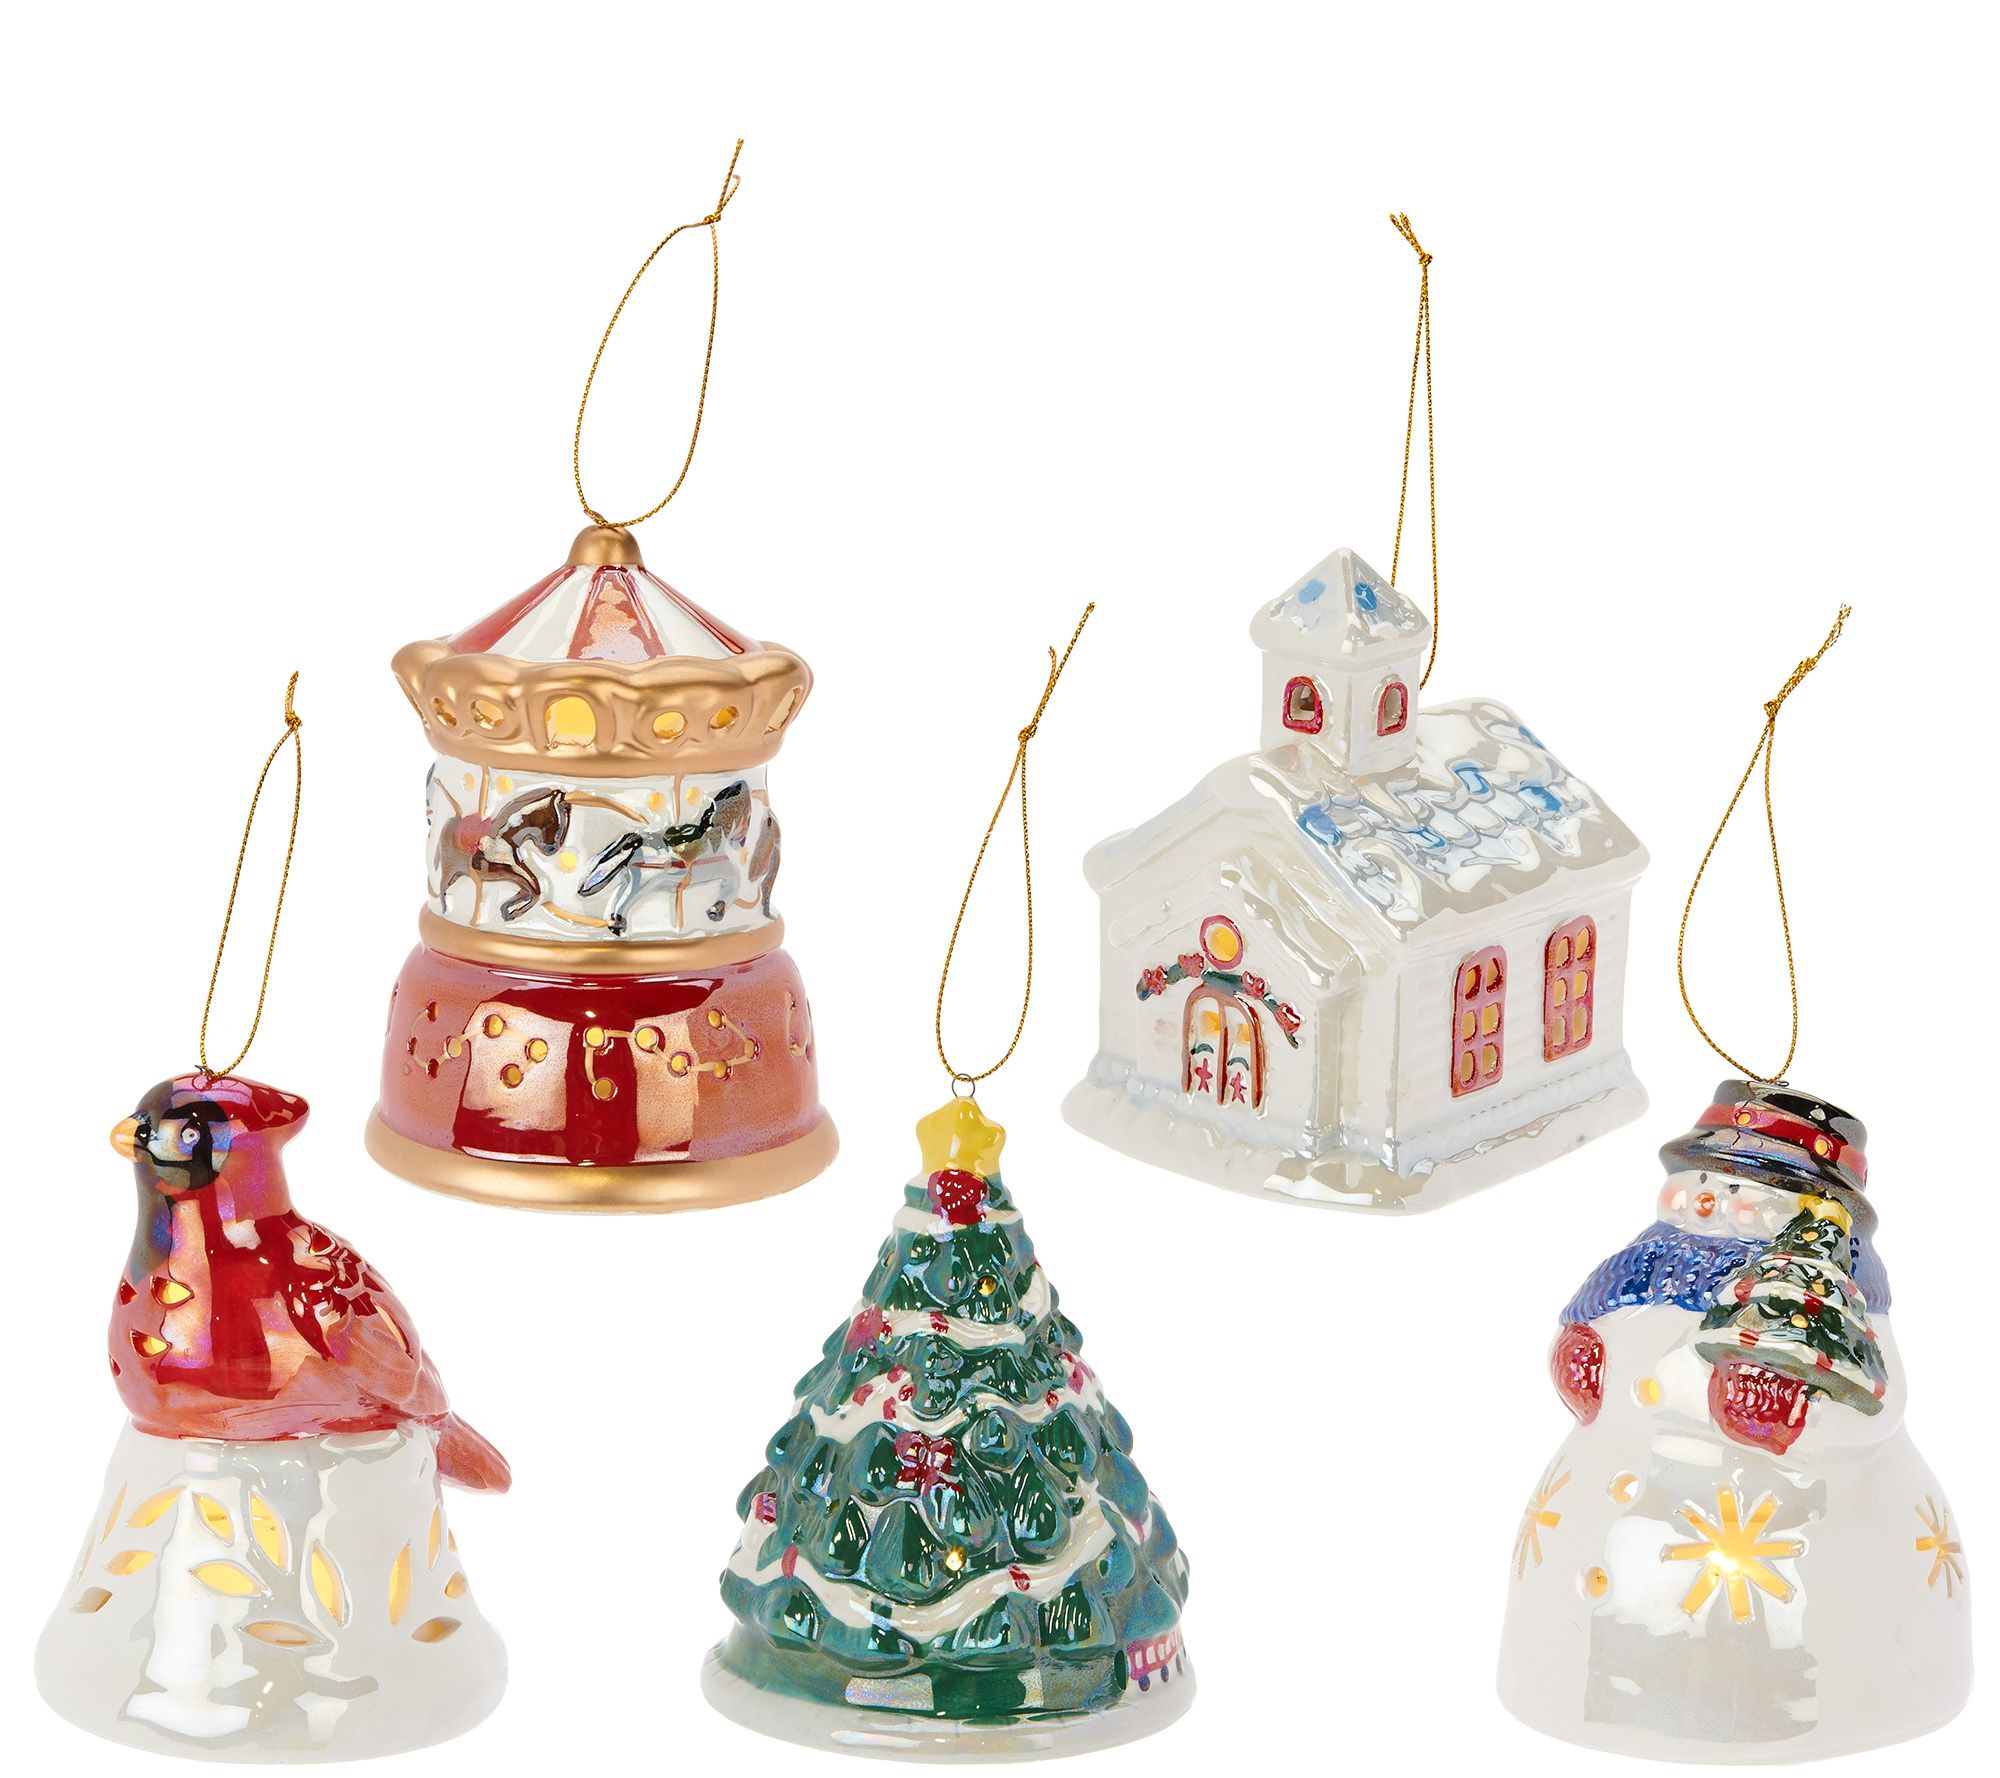 Mr. Christmas S/5 Porcelain Illuminated Ornaments with Gift Bags ...